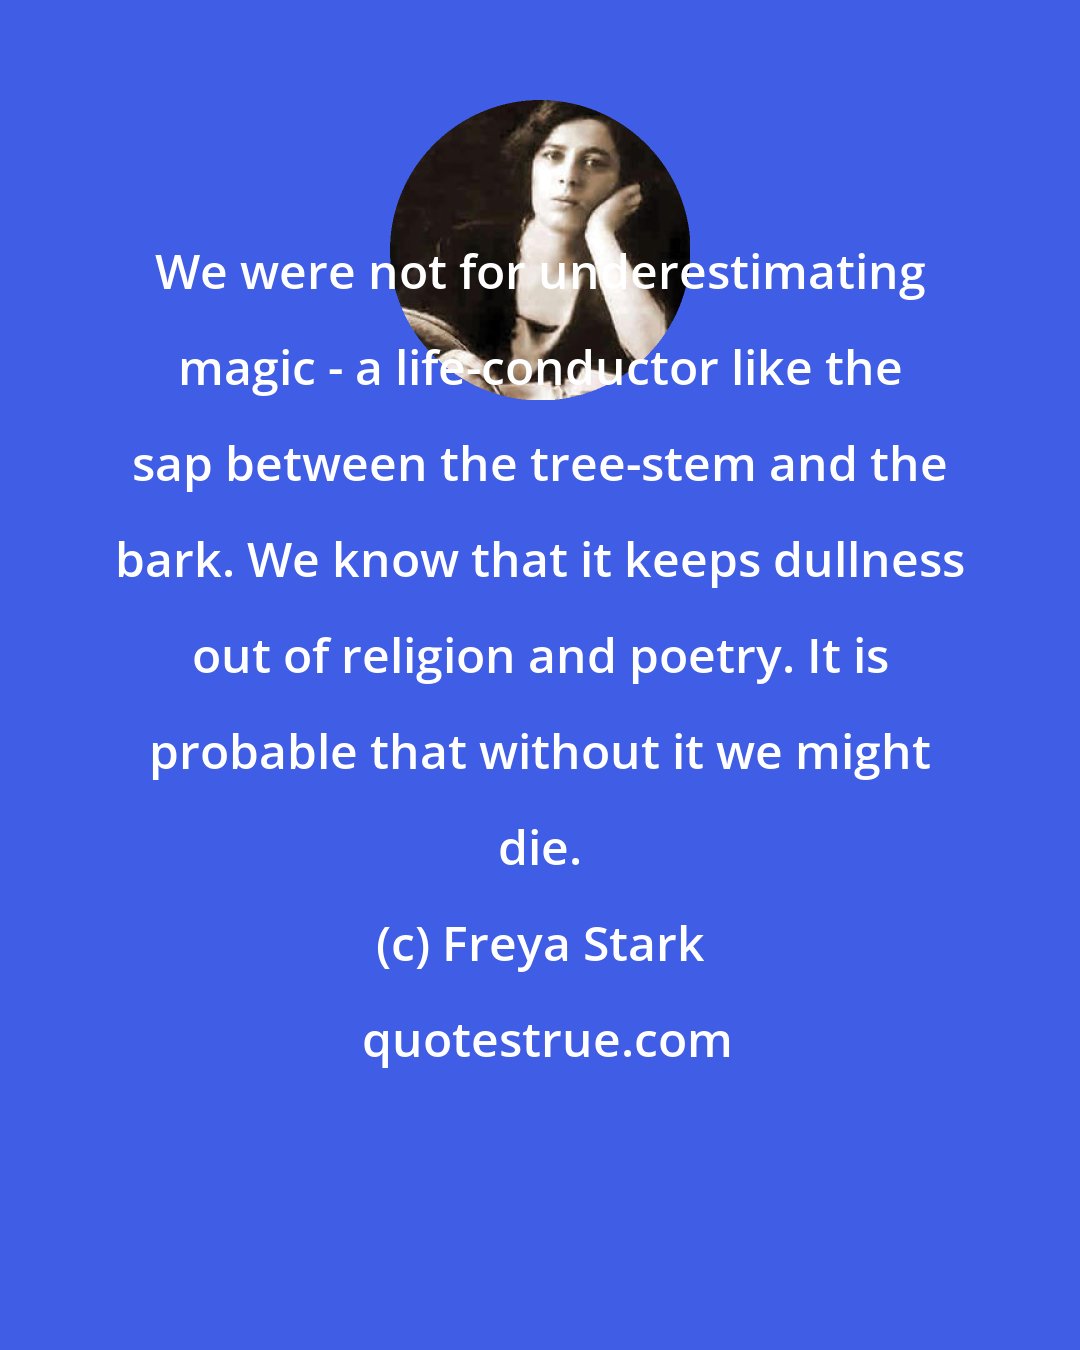 Freya Stark: We were not for underestimating magic - a life-conductor like the sap between the tree-stem and the bark. We know that it keeps dullness out of religion and poetry. It is probable that without it we might die.